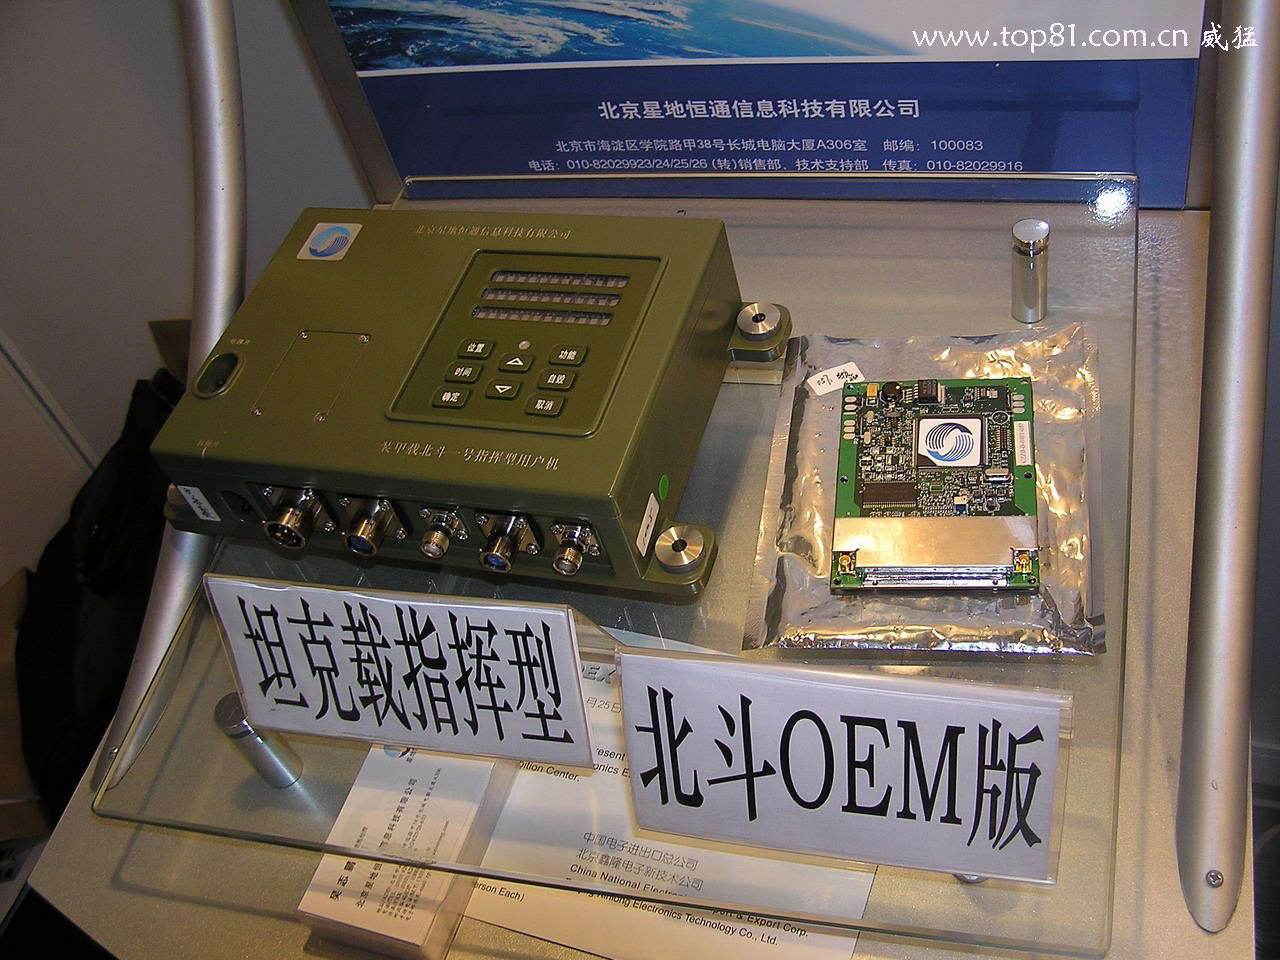 chinese GPS receiver. They use chinese "bei dou" satellite.  This